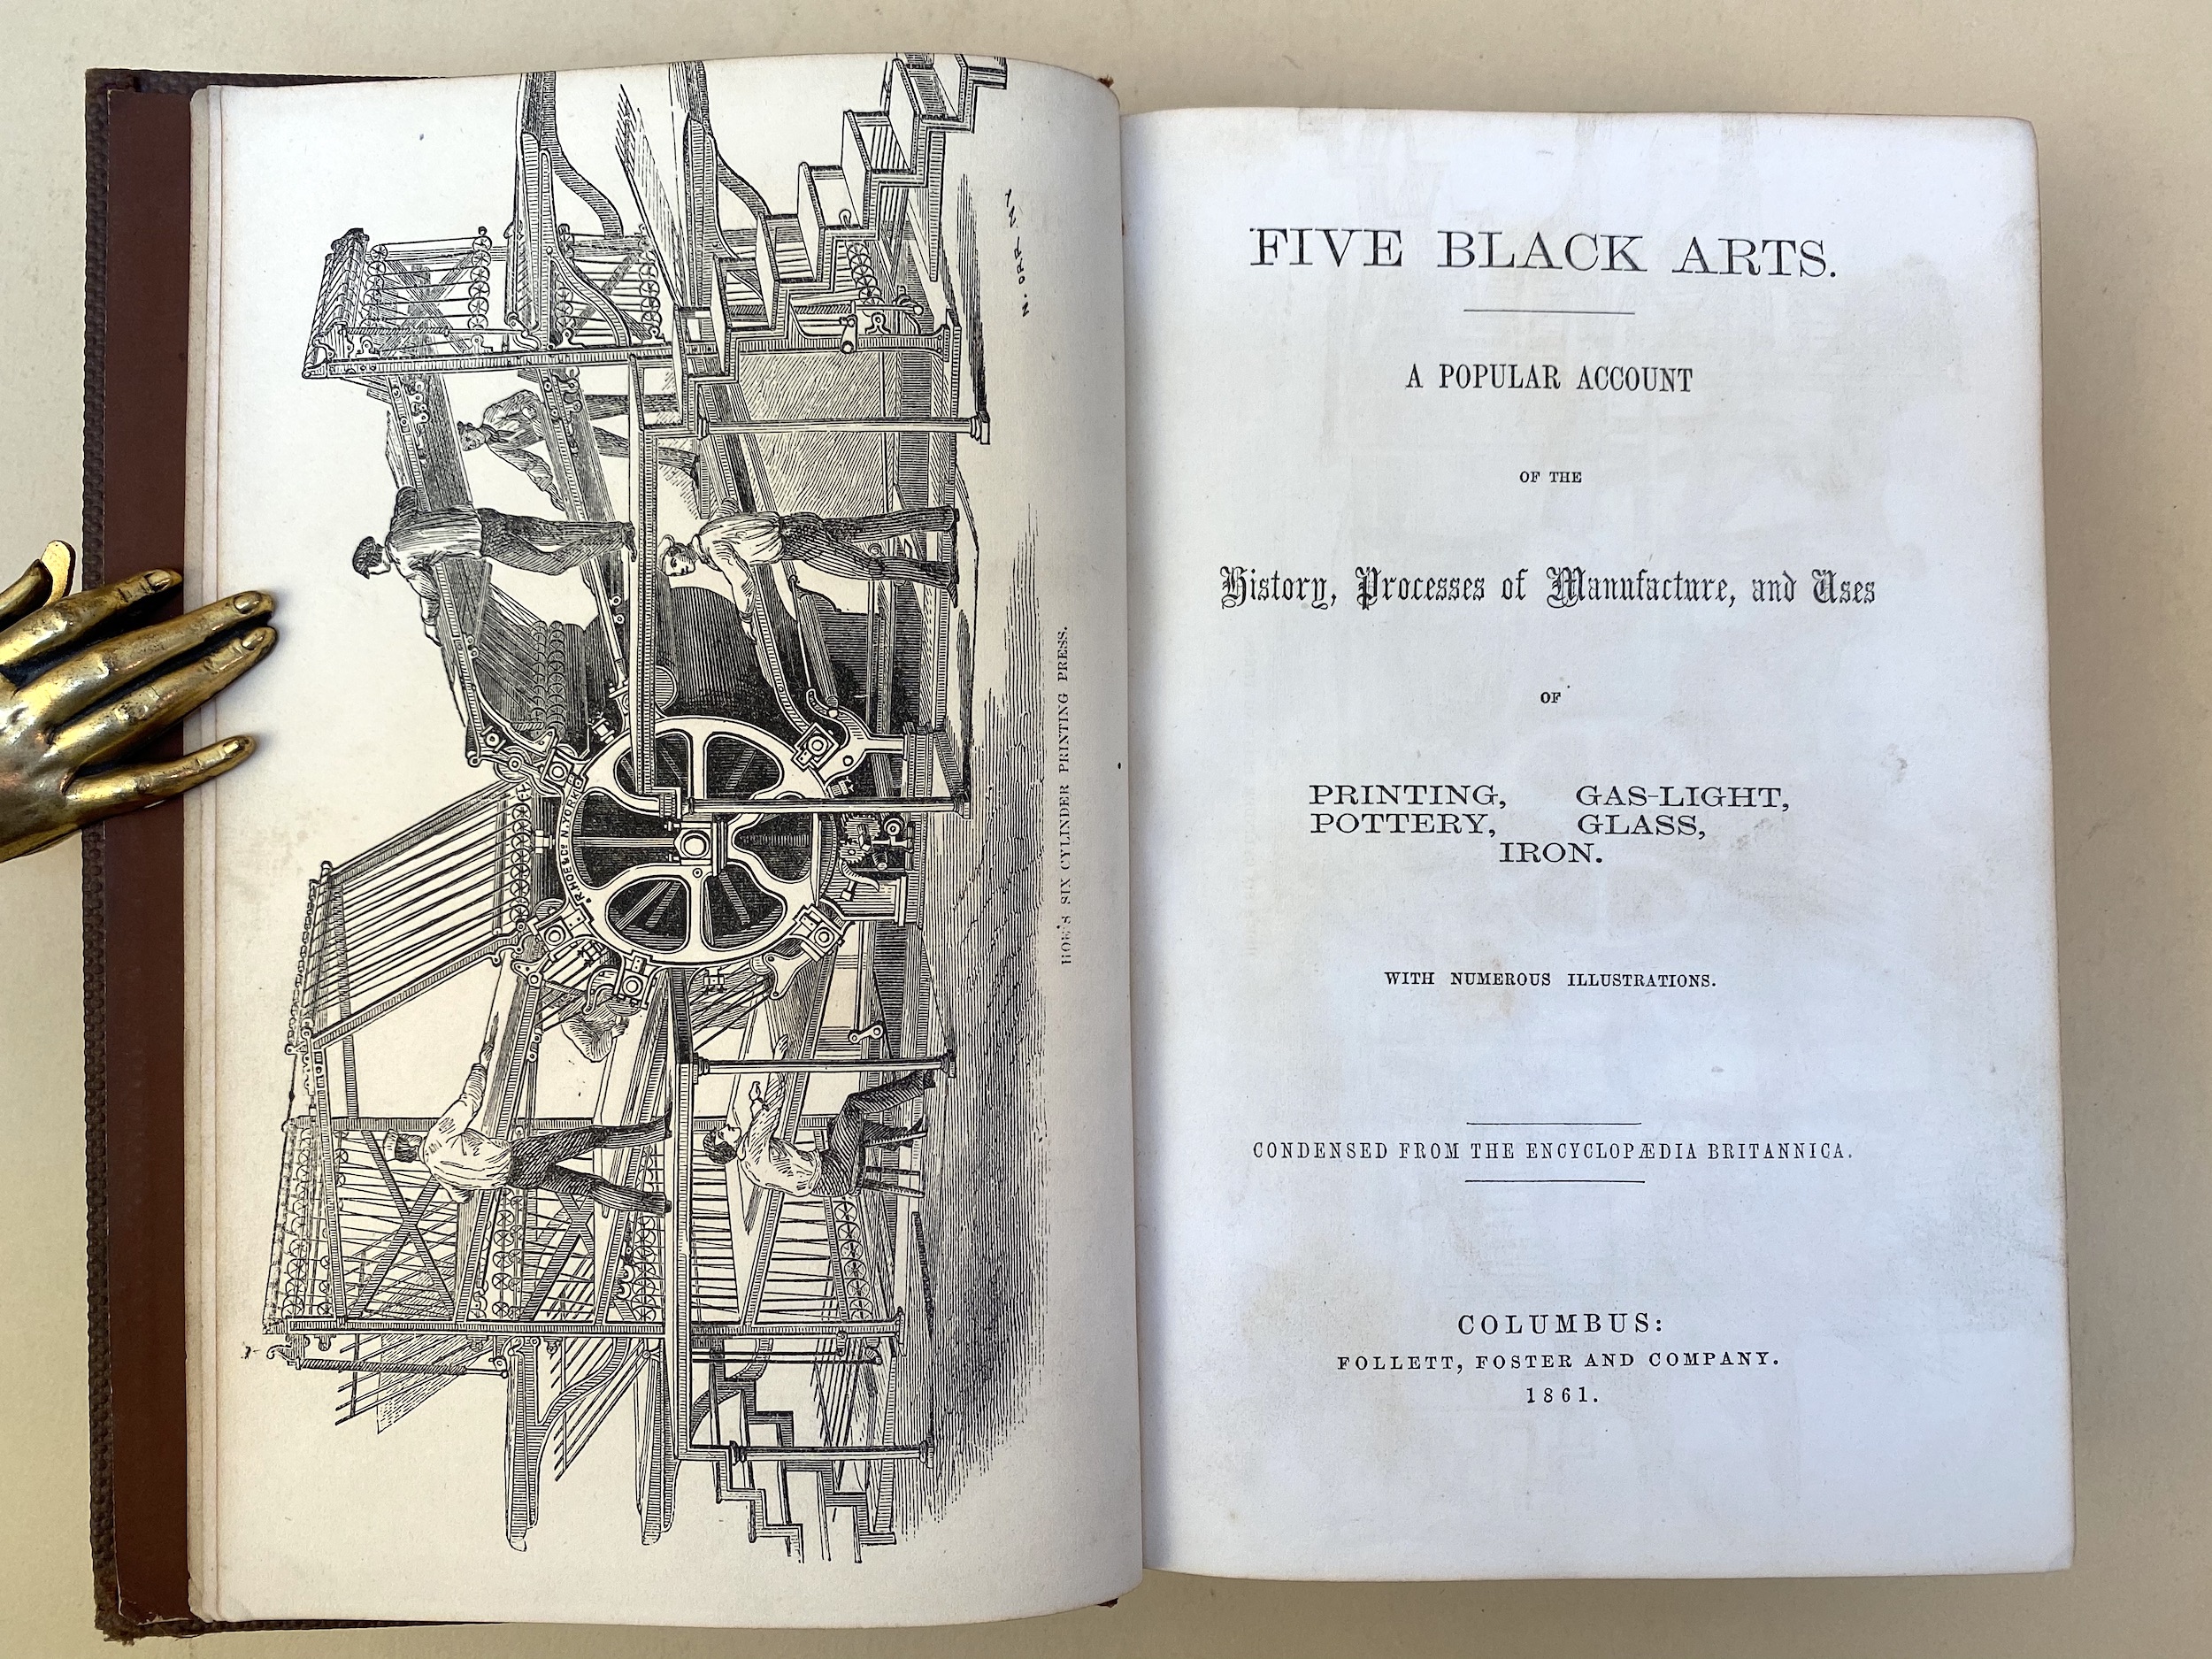 Five Black Arts title page and frontispiece